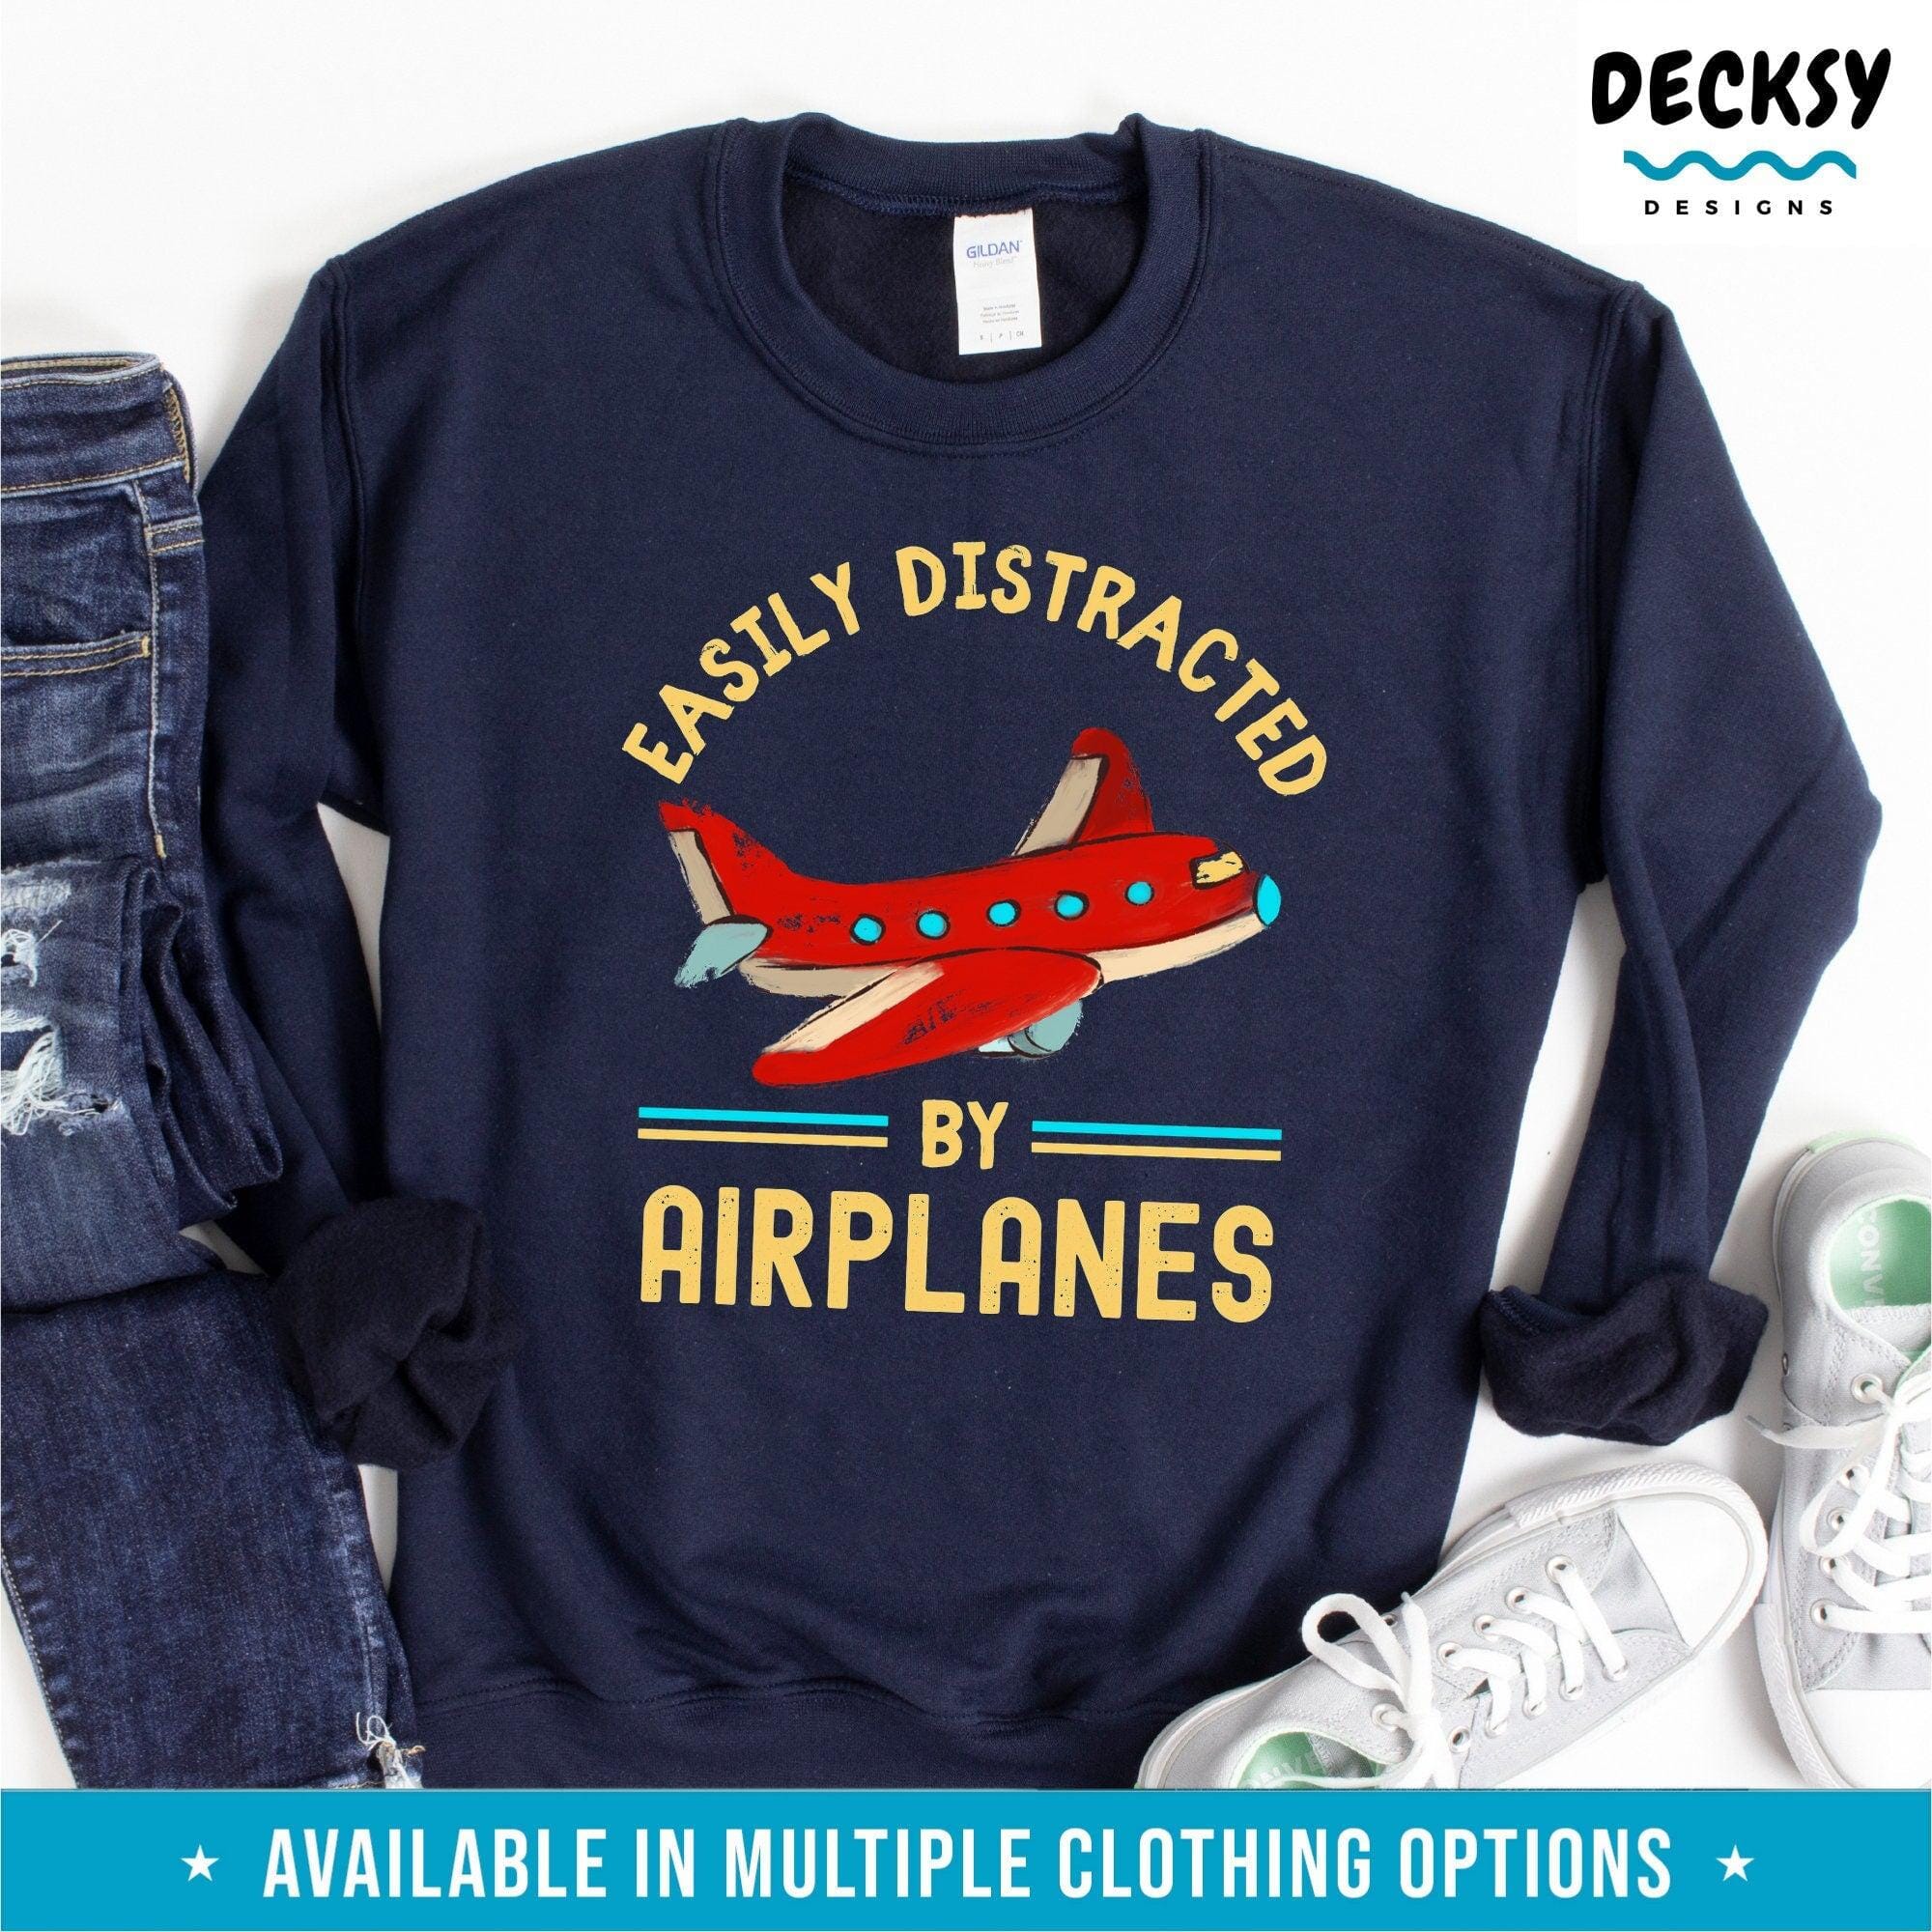 Easily Distracted By Airplanes Shirt, Aviation Gift-Clothing:Gender-Neutral Adult Clothing:Tops & Tees:T-shirts:Graphic Tees-DecksyDesigns